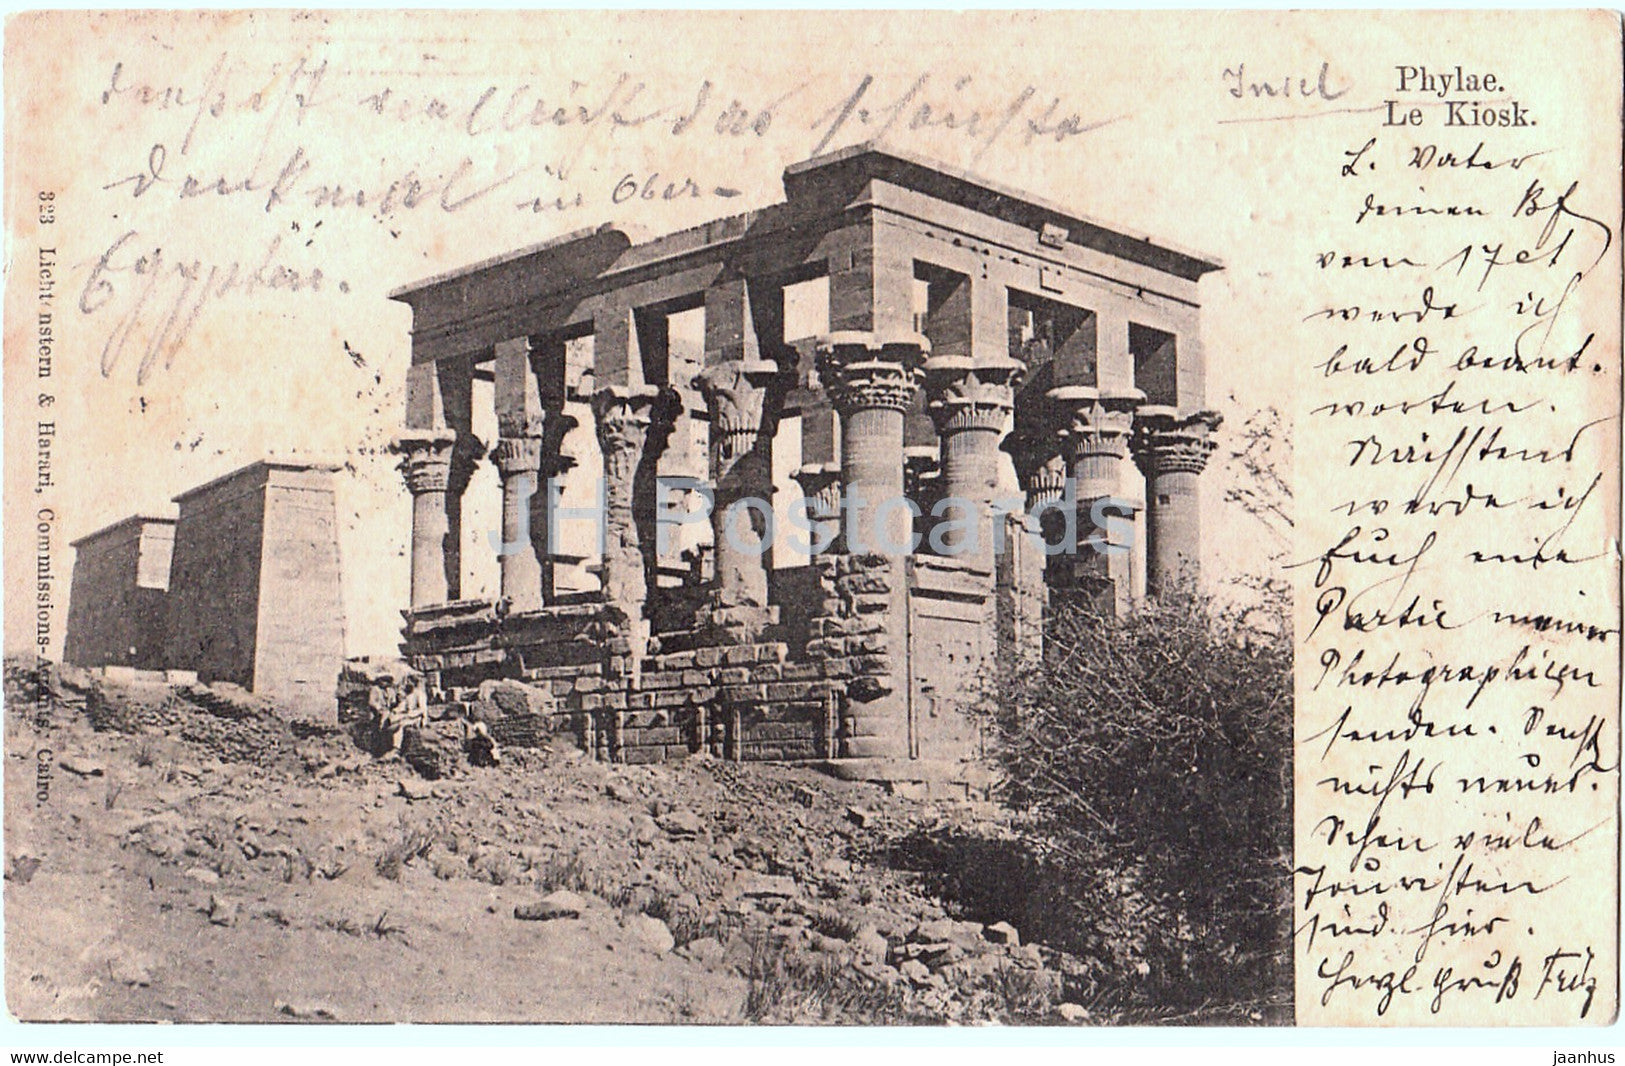 Phylae - Le Kiosk - ancient world - 323 - old postcard - 1903 - Egypt - used - JH Postcards